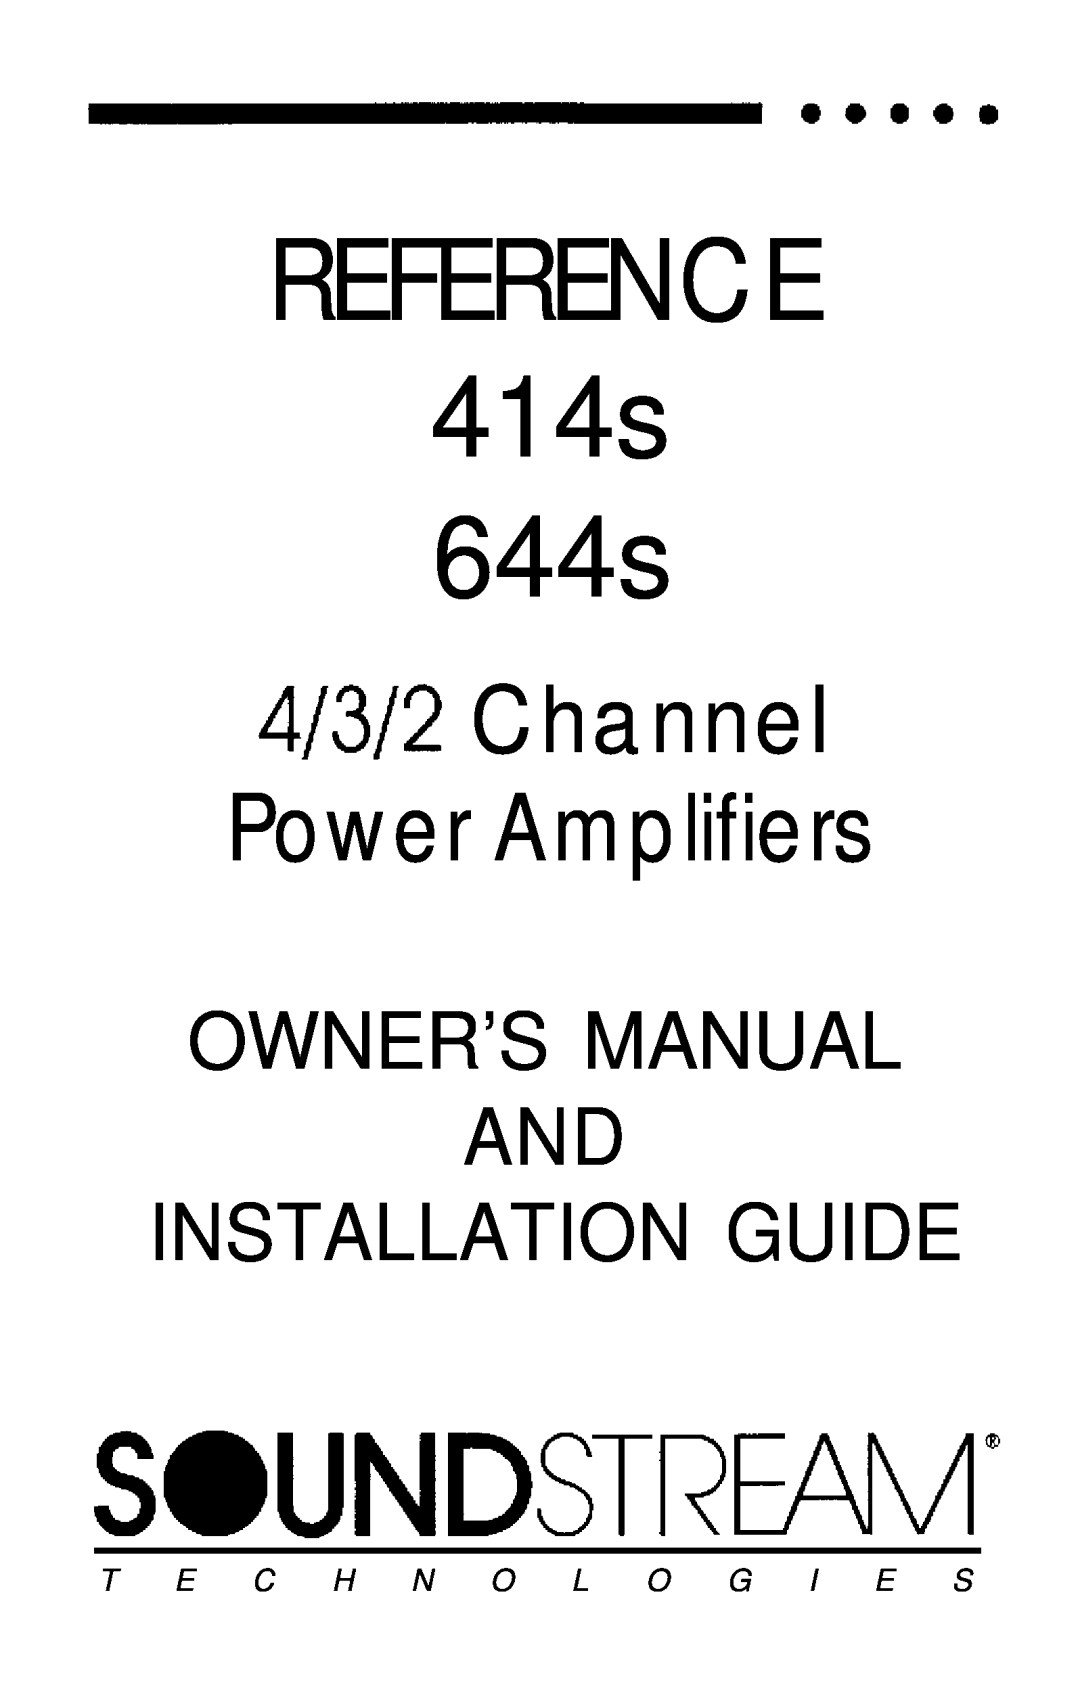 Soundstream Technologies owner manual Soundstream, REFERENCE 414s 644s, 4/3/2 Channel Power Amplifiers 